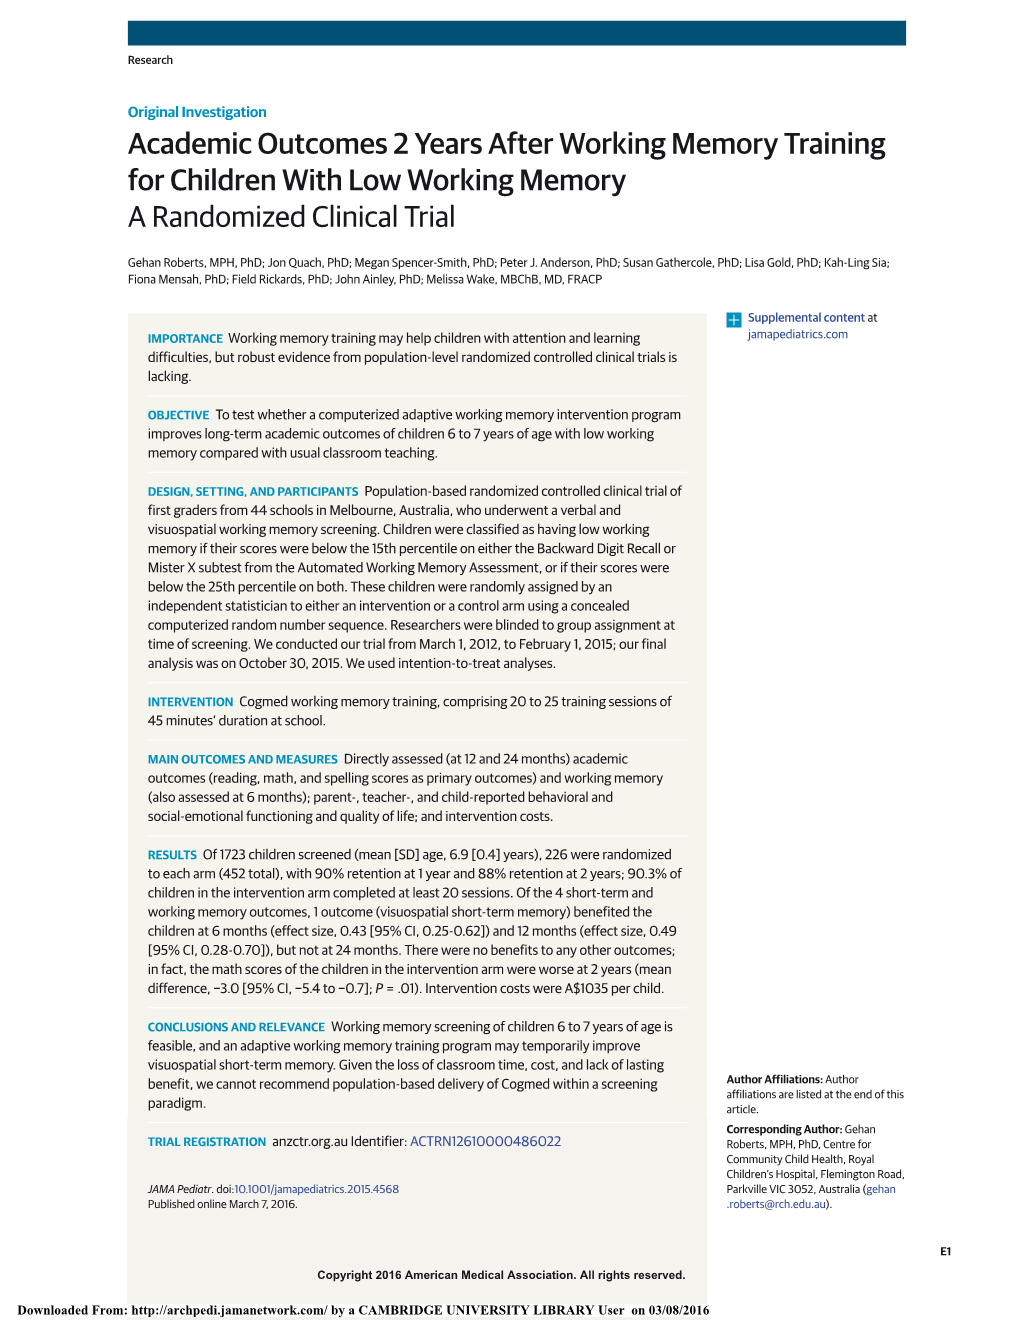 Academic Outcomes 2 Years After Working Memory Training for Children with Low Working Memory:€€A Randomized Clinical Trial